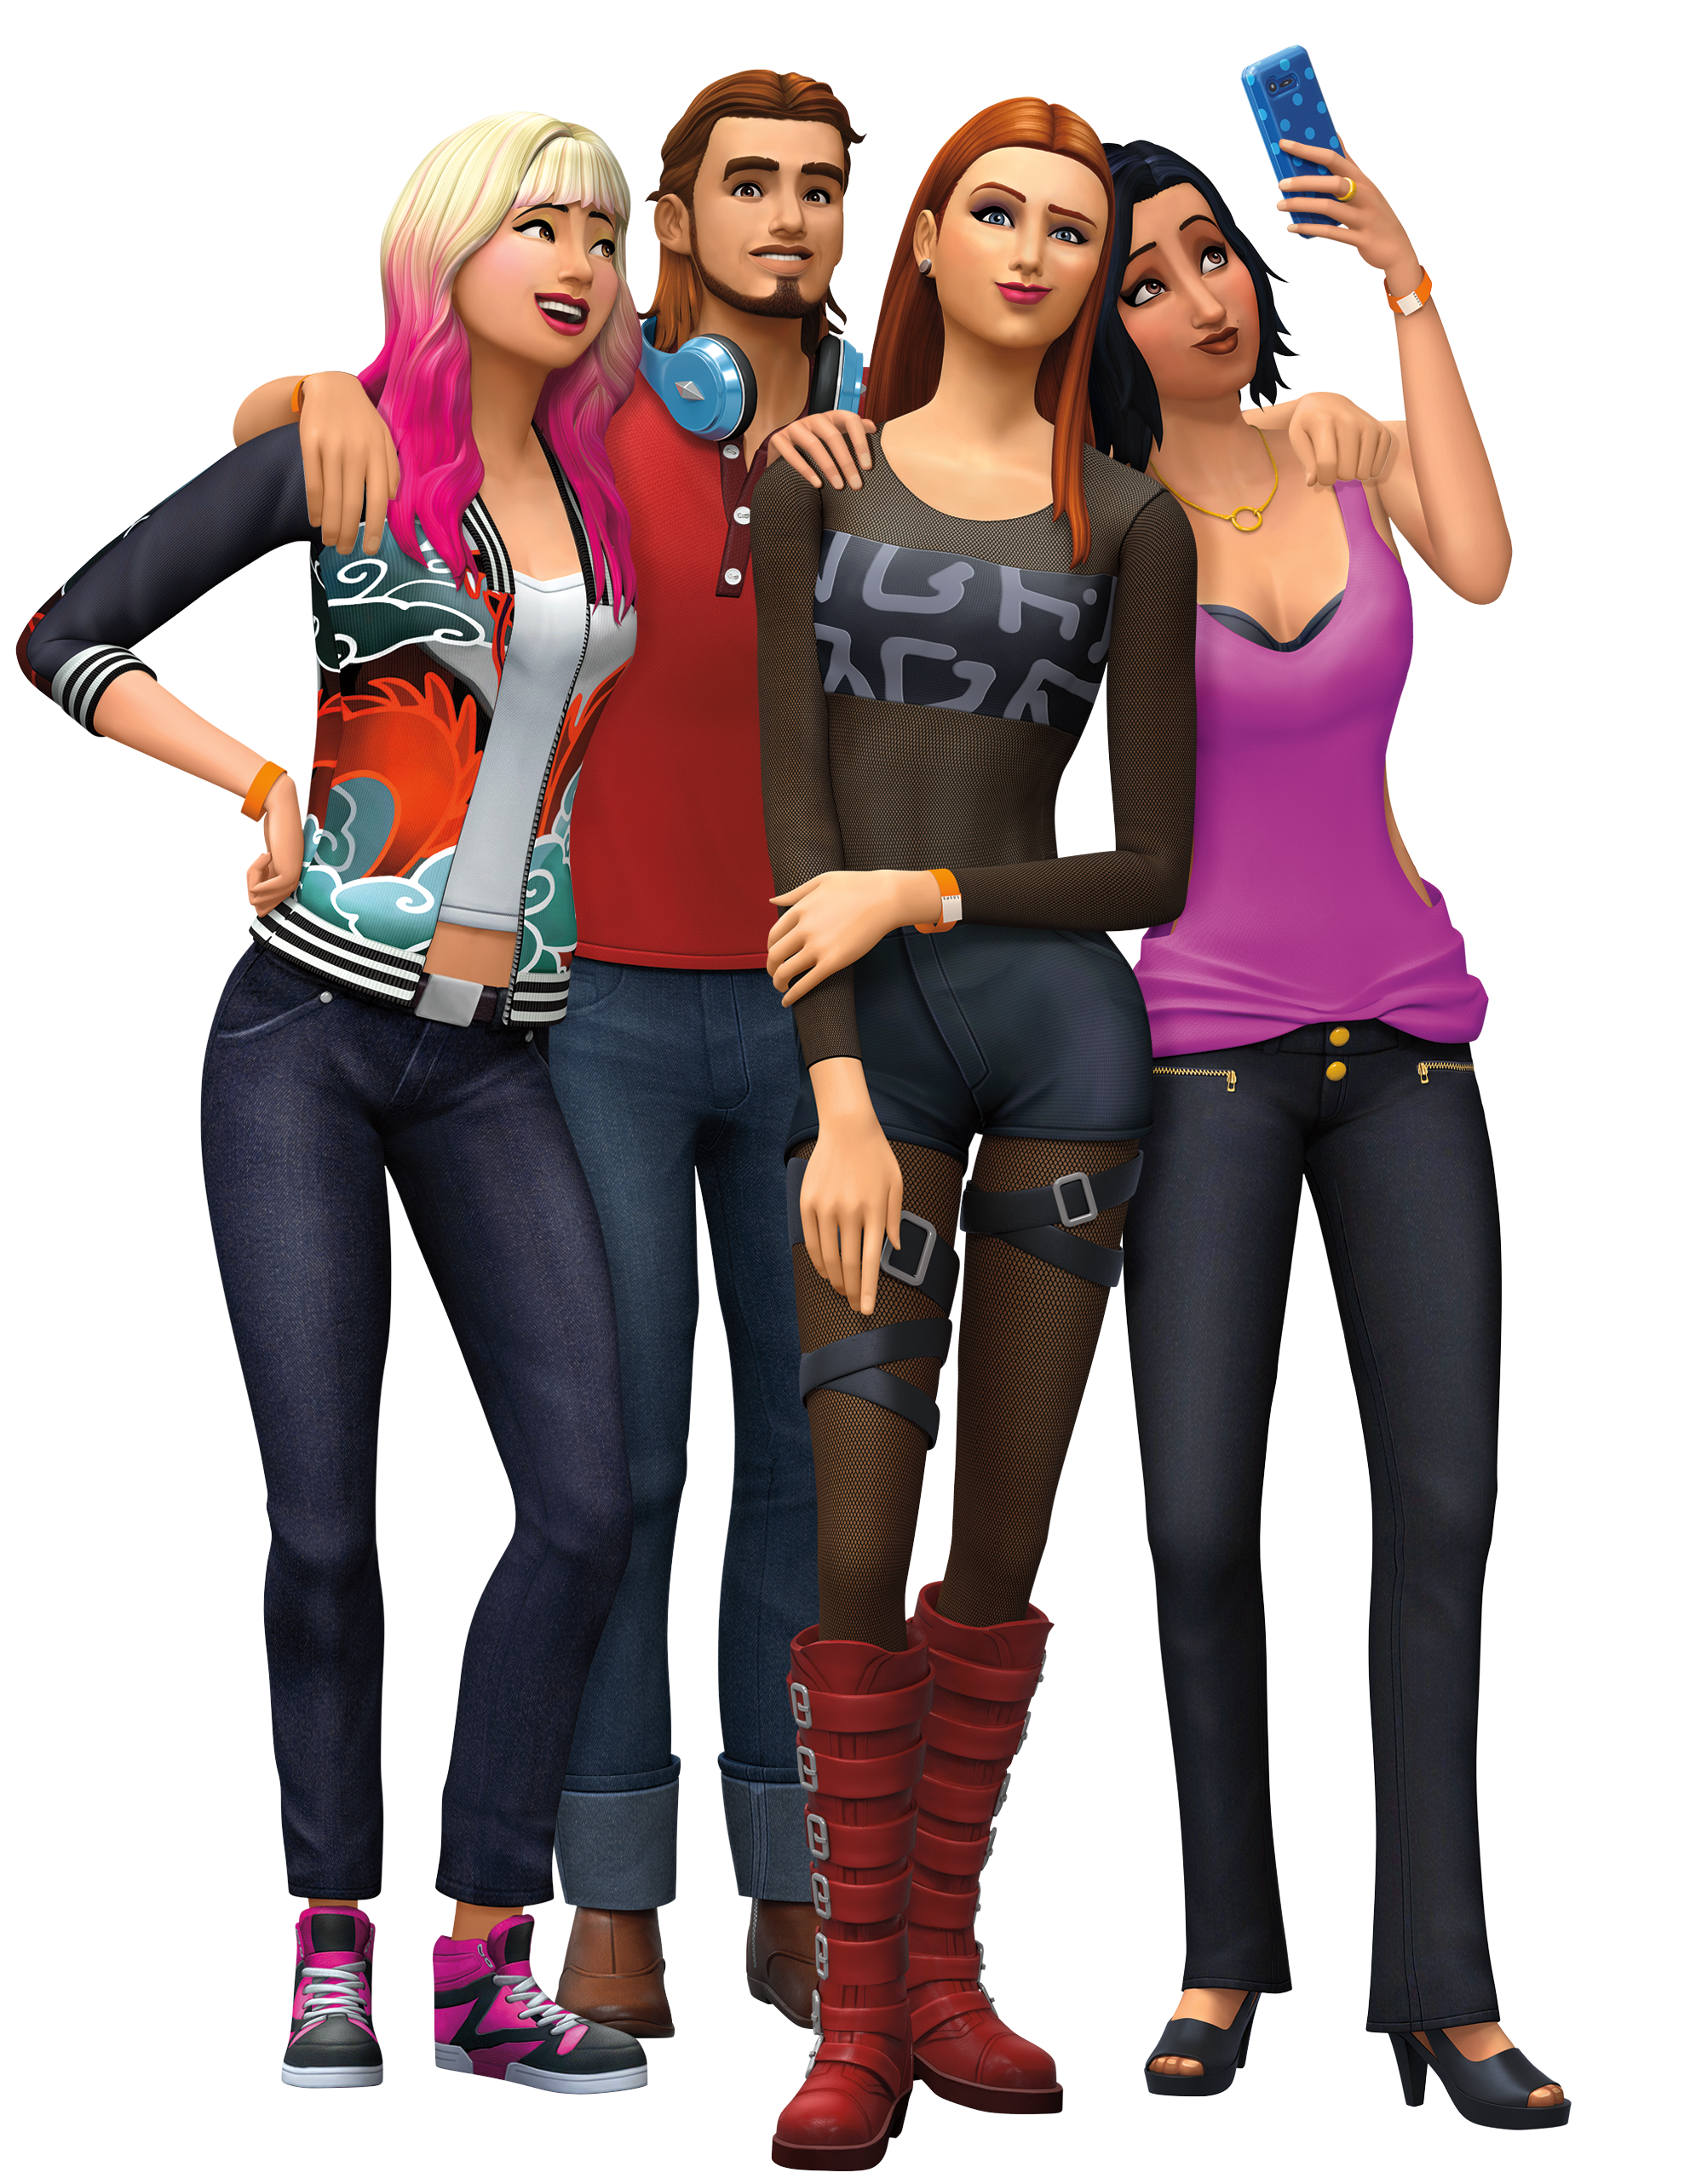 Sims 4 get together wiki gainvica